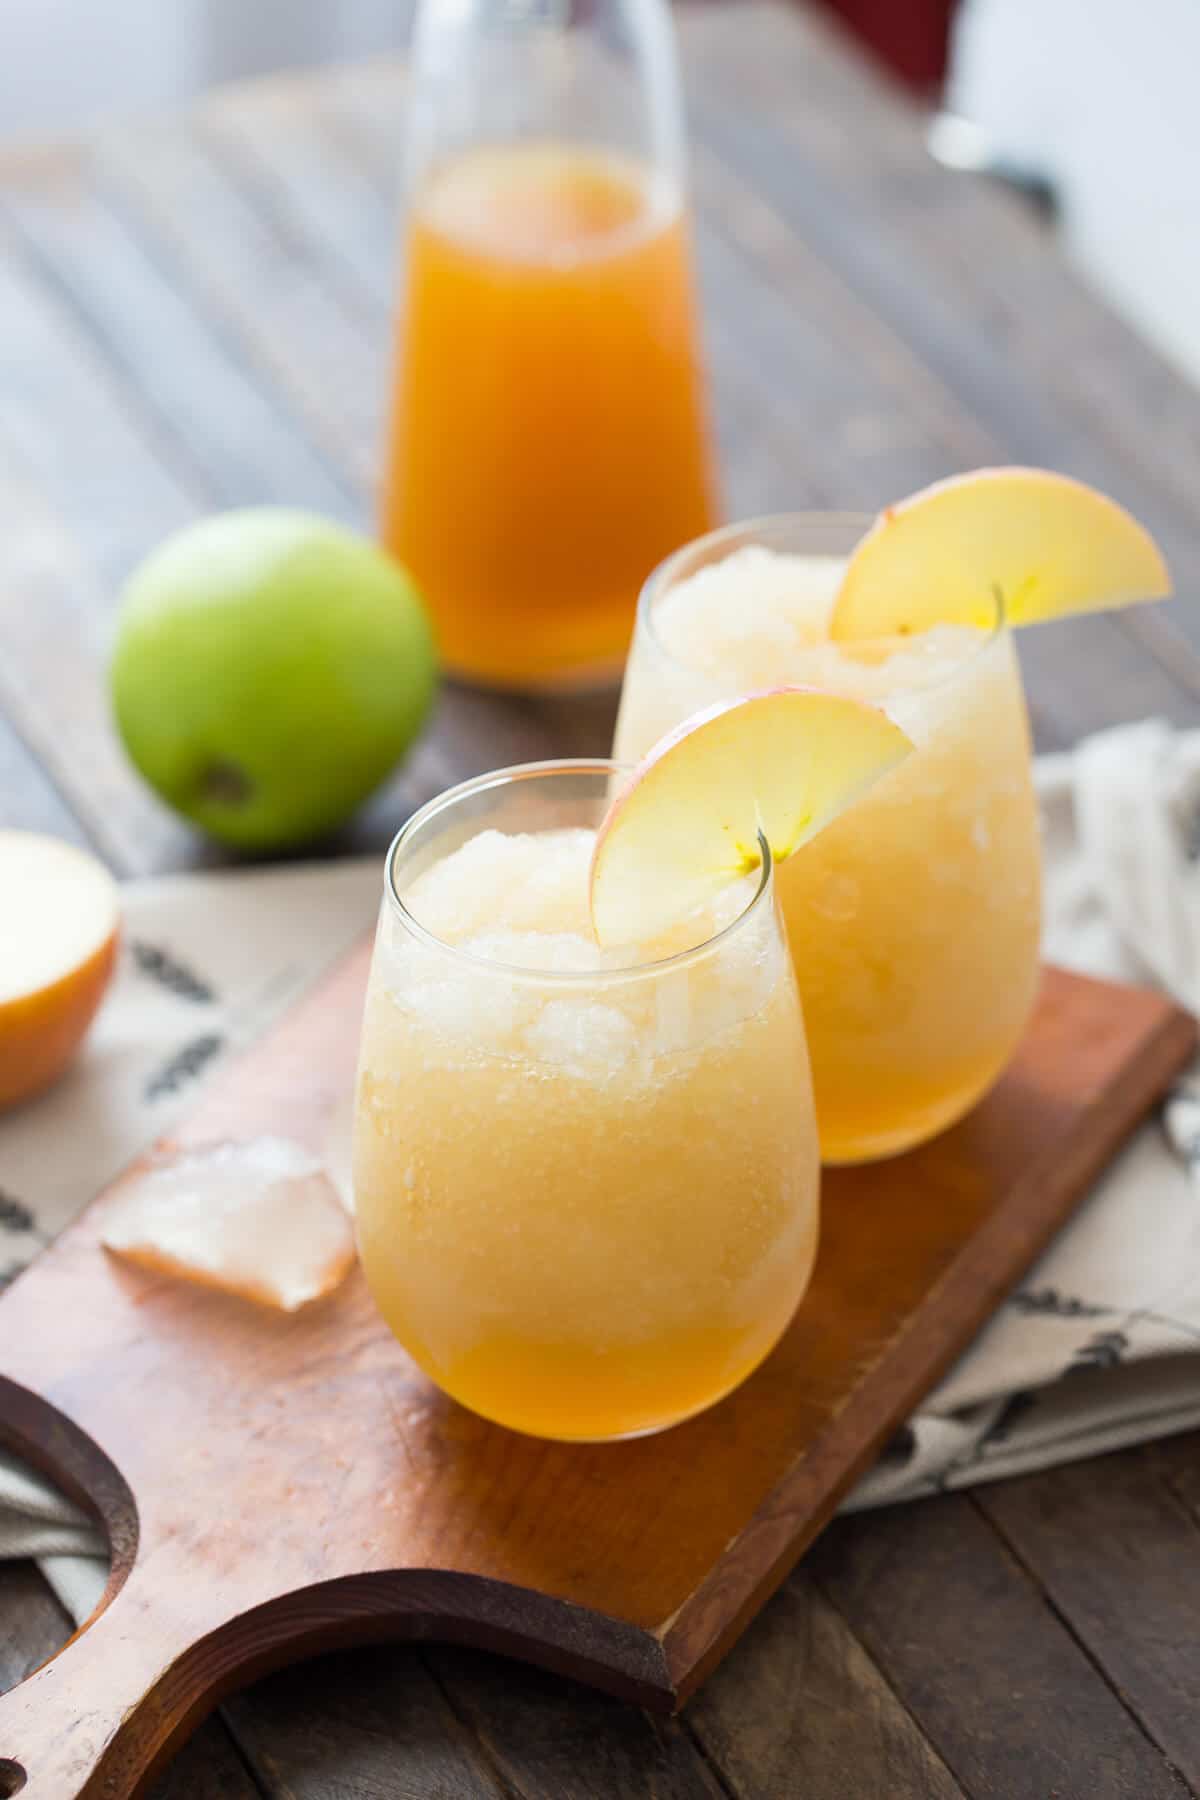 Wine slushies with a taste of fall! Apple cider and wine make one amazing cocktail!